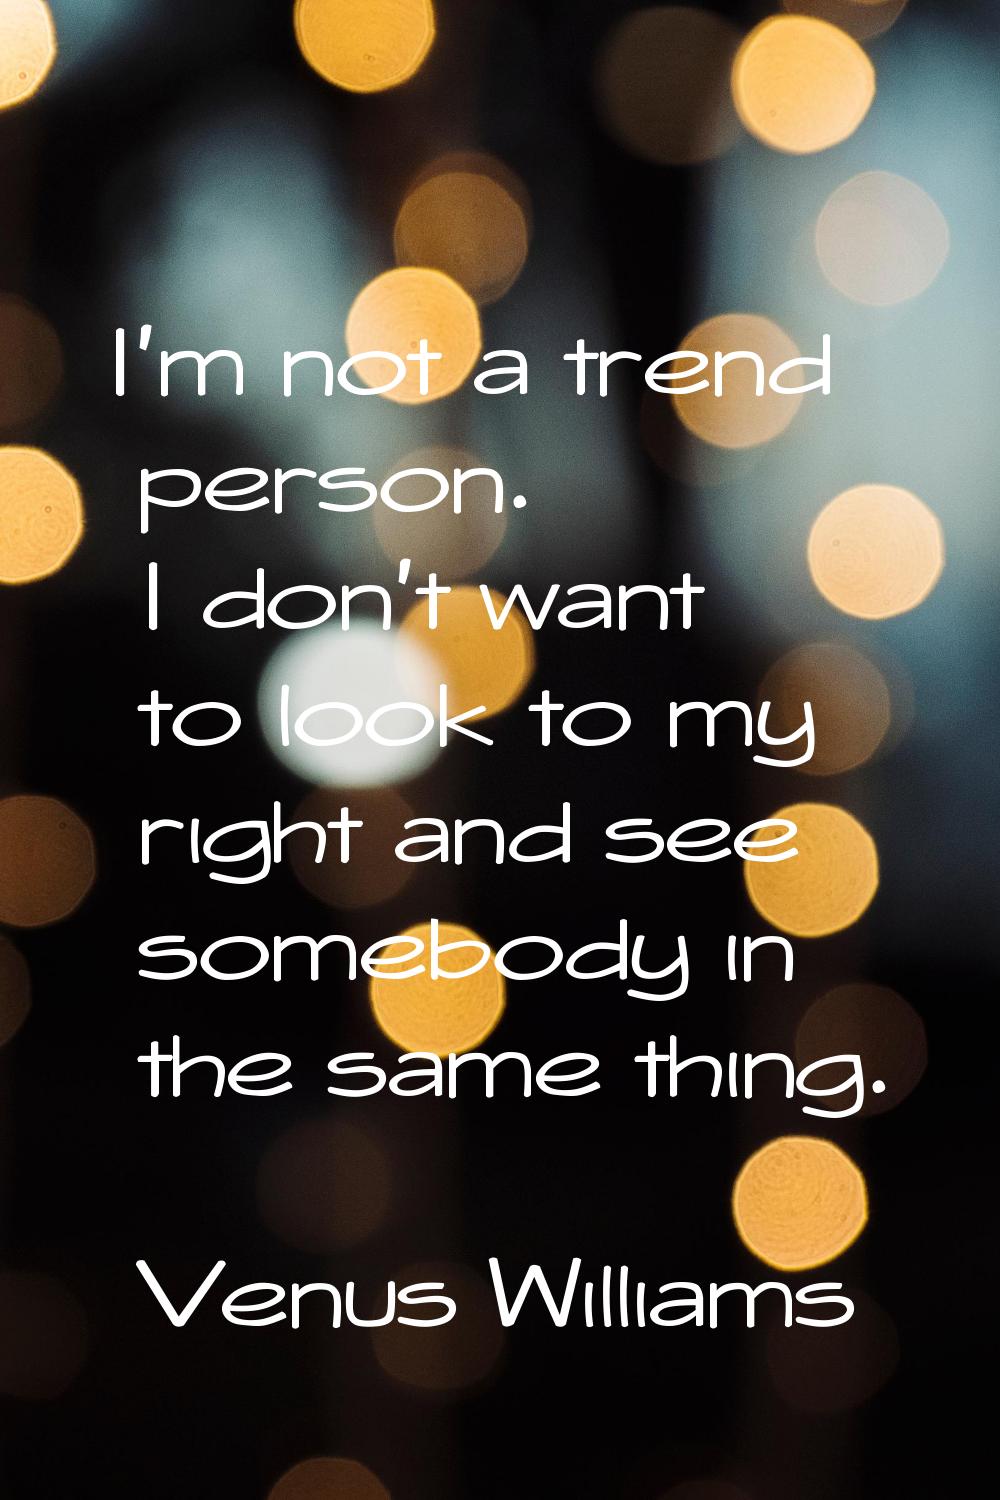 I'm not a trend person. I don't want to look to my right and see somebody in the same thing.